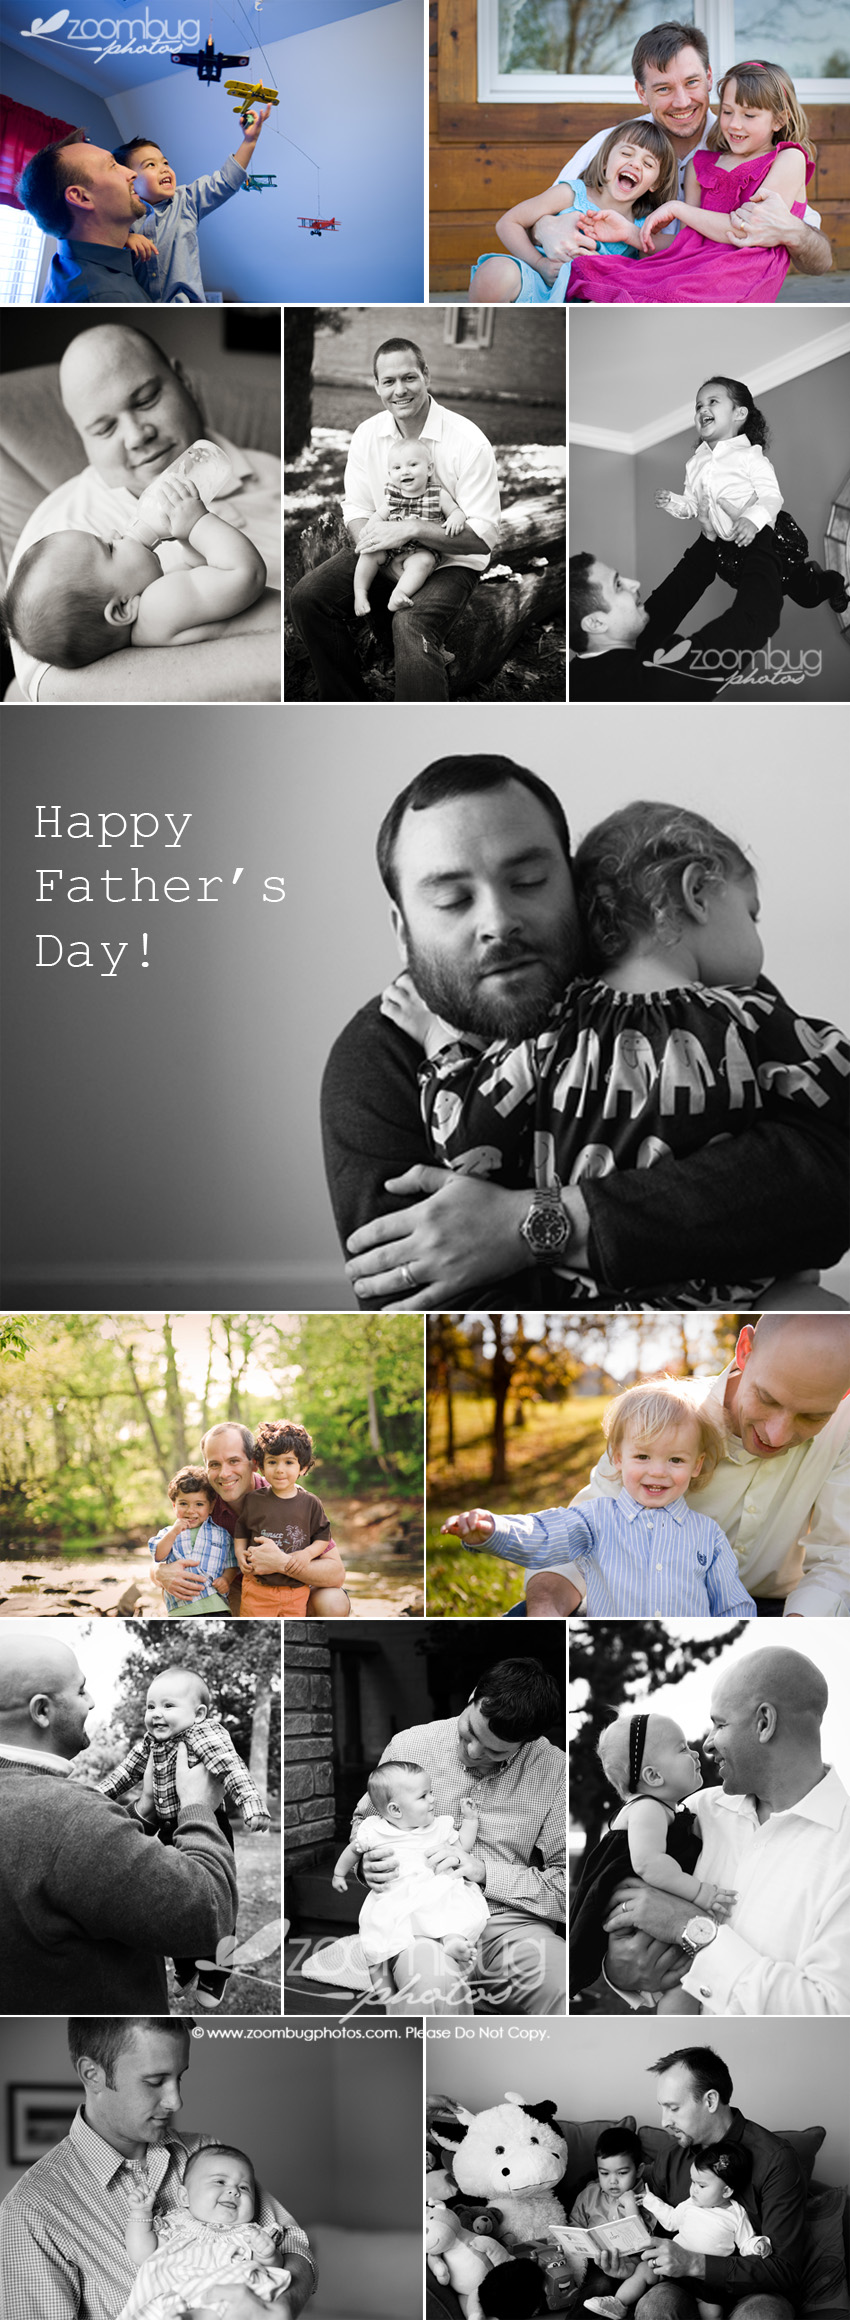 fathers Day Pictures